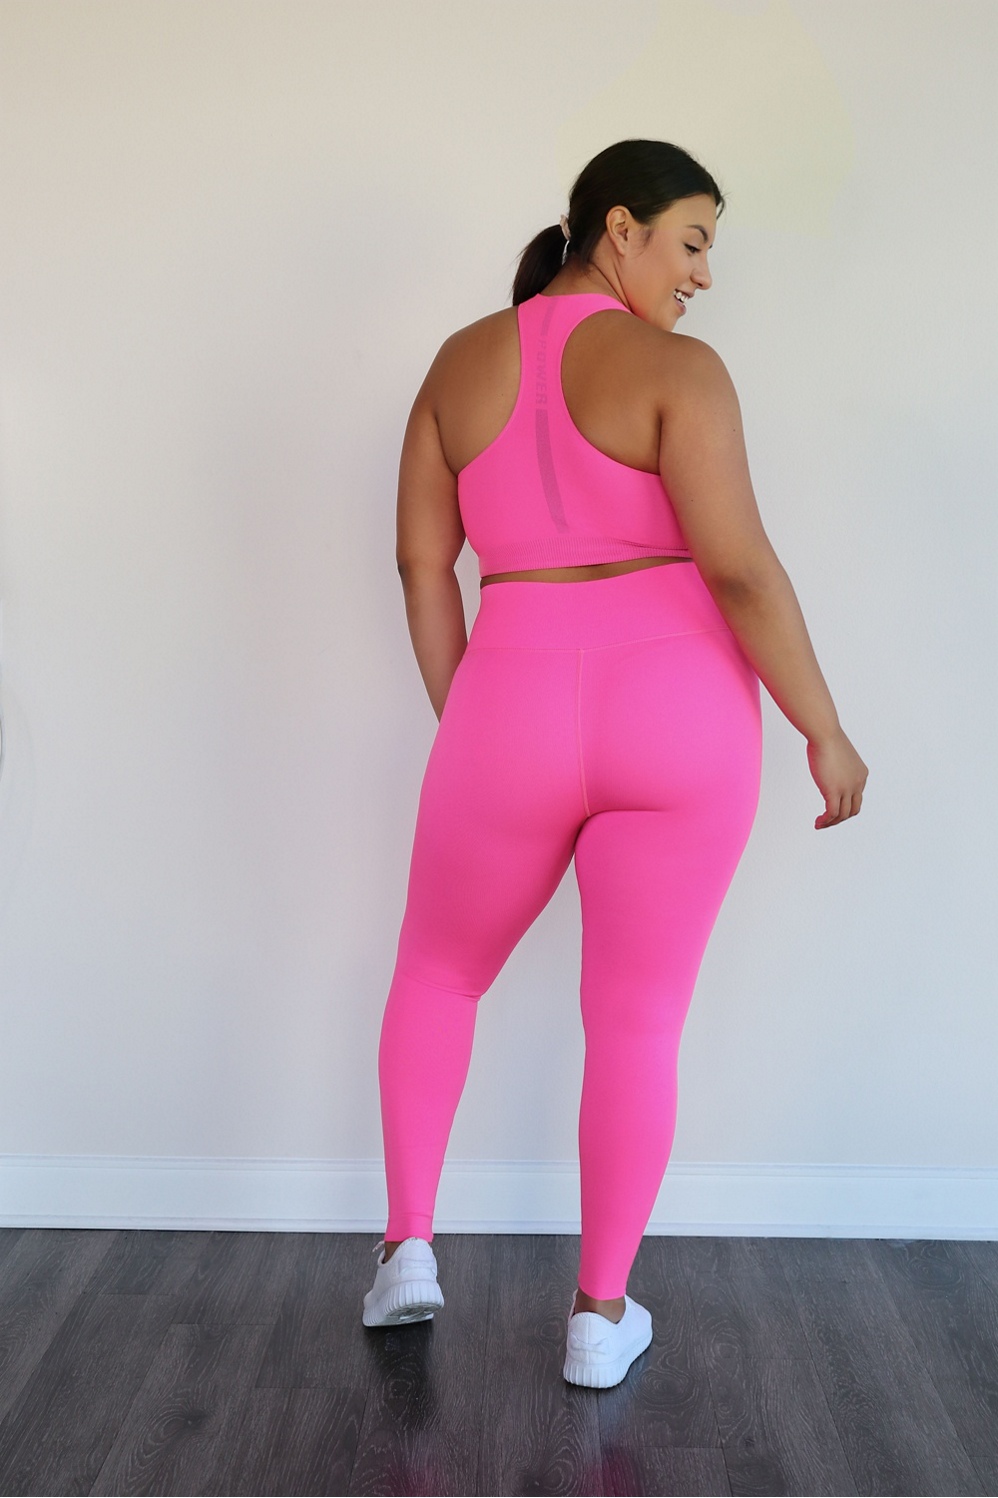 Activewear Shopping Guide  The Best Leggings, Sports Bras & More - Katie's  Bliss